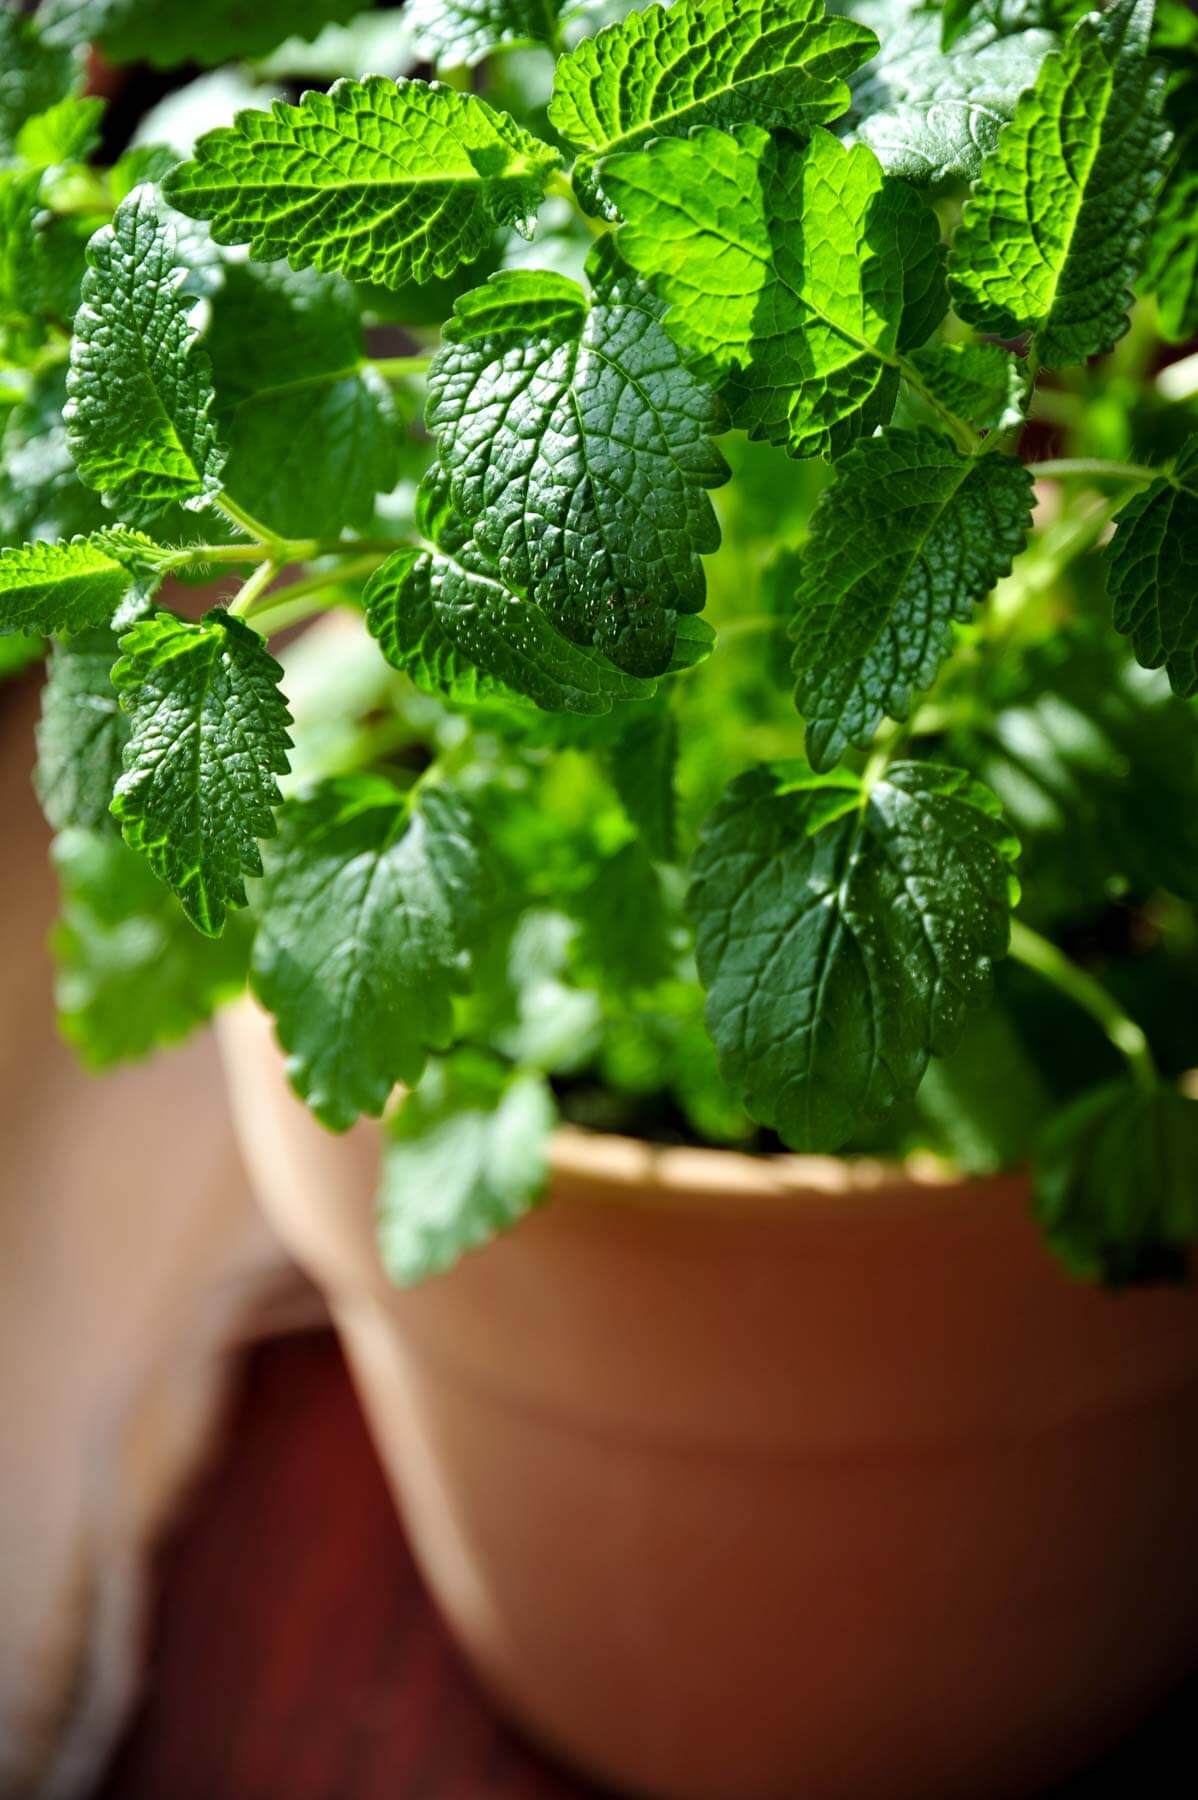 Selecting The Ideal Location For Growing Lemon Balm